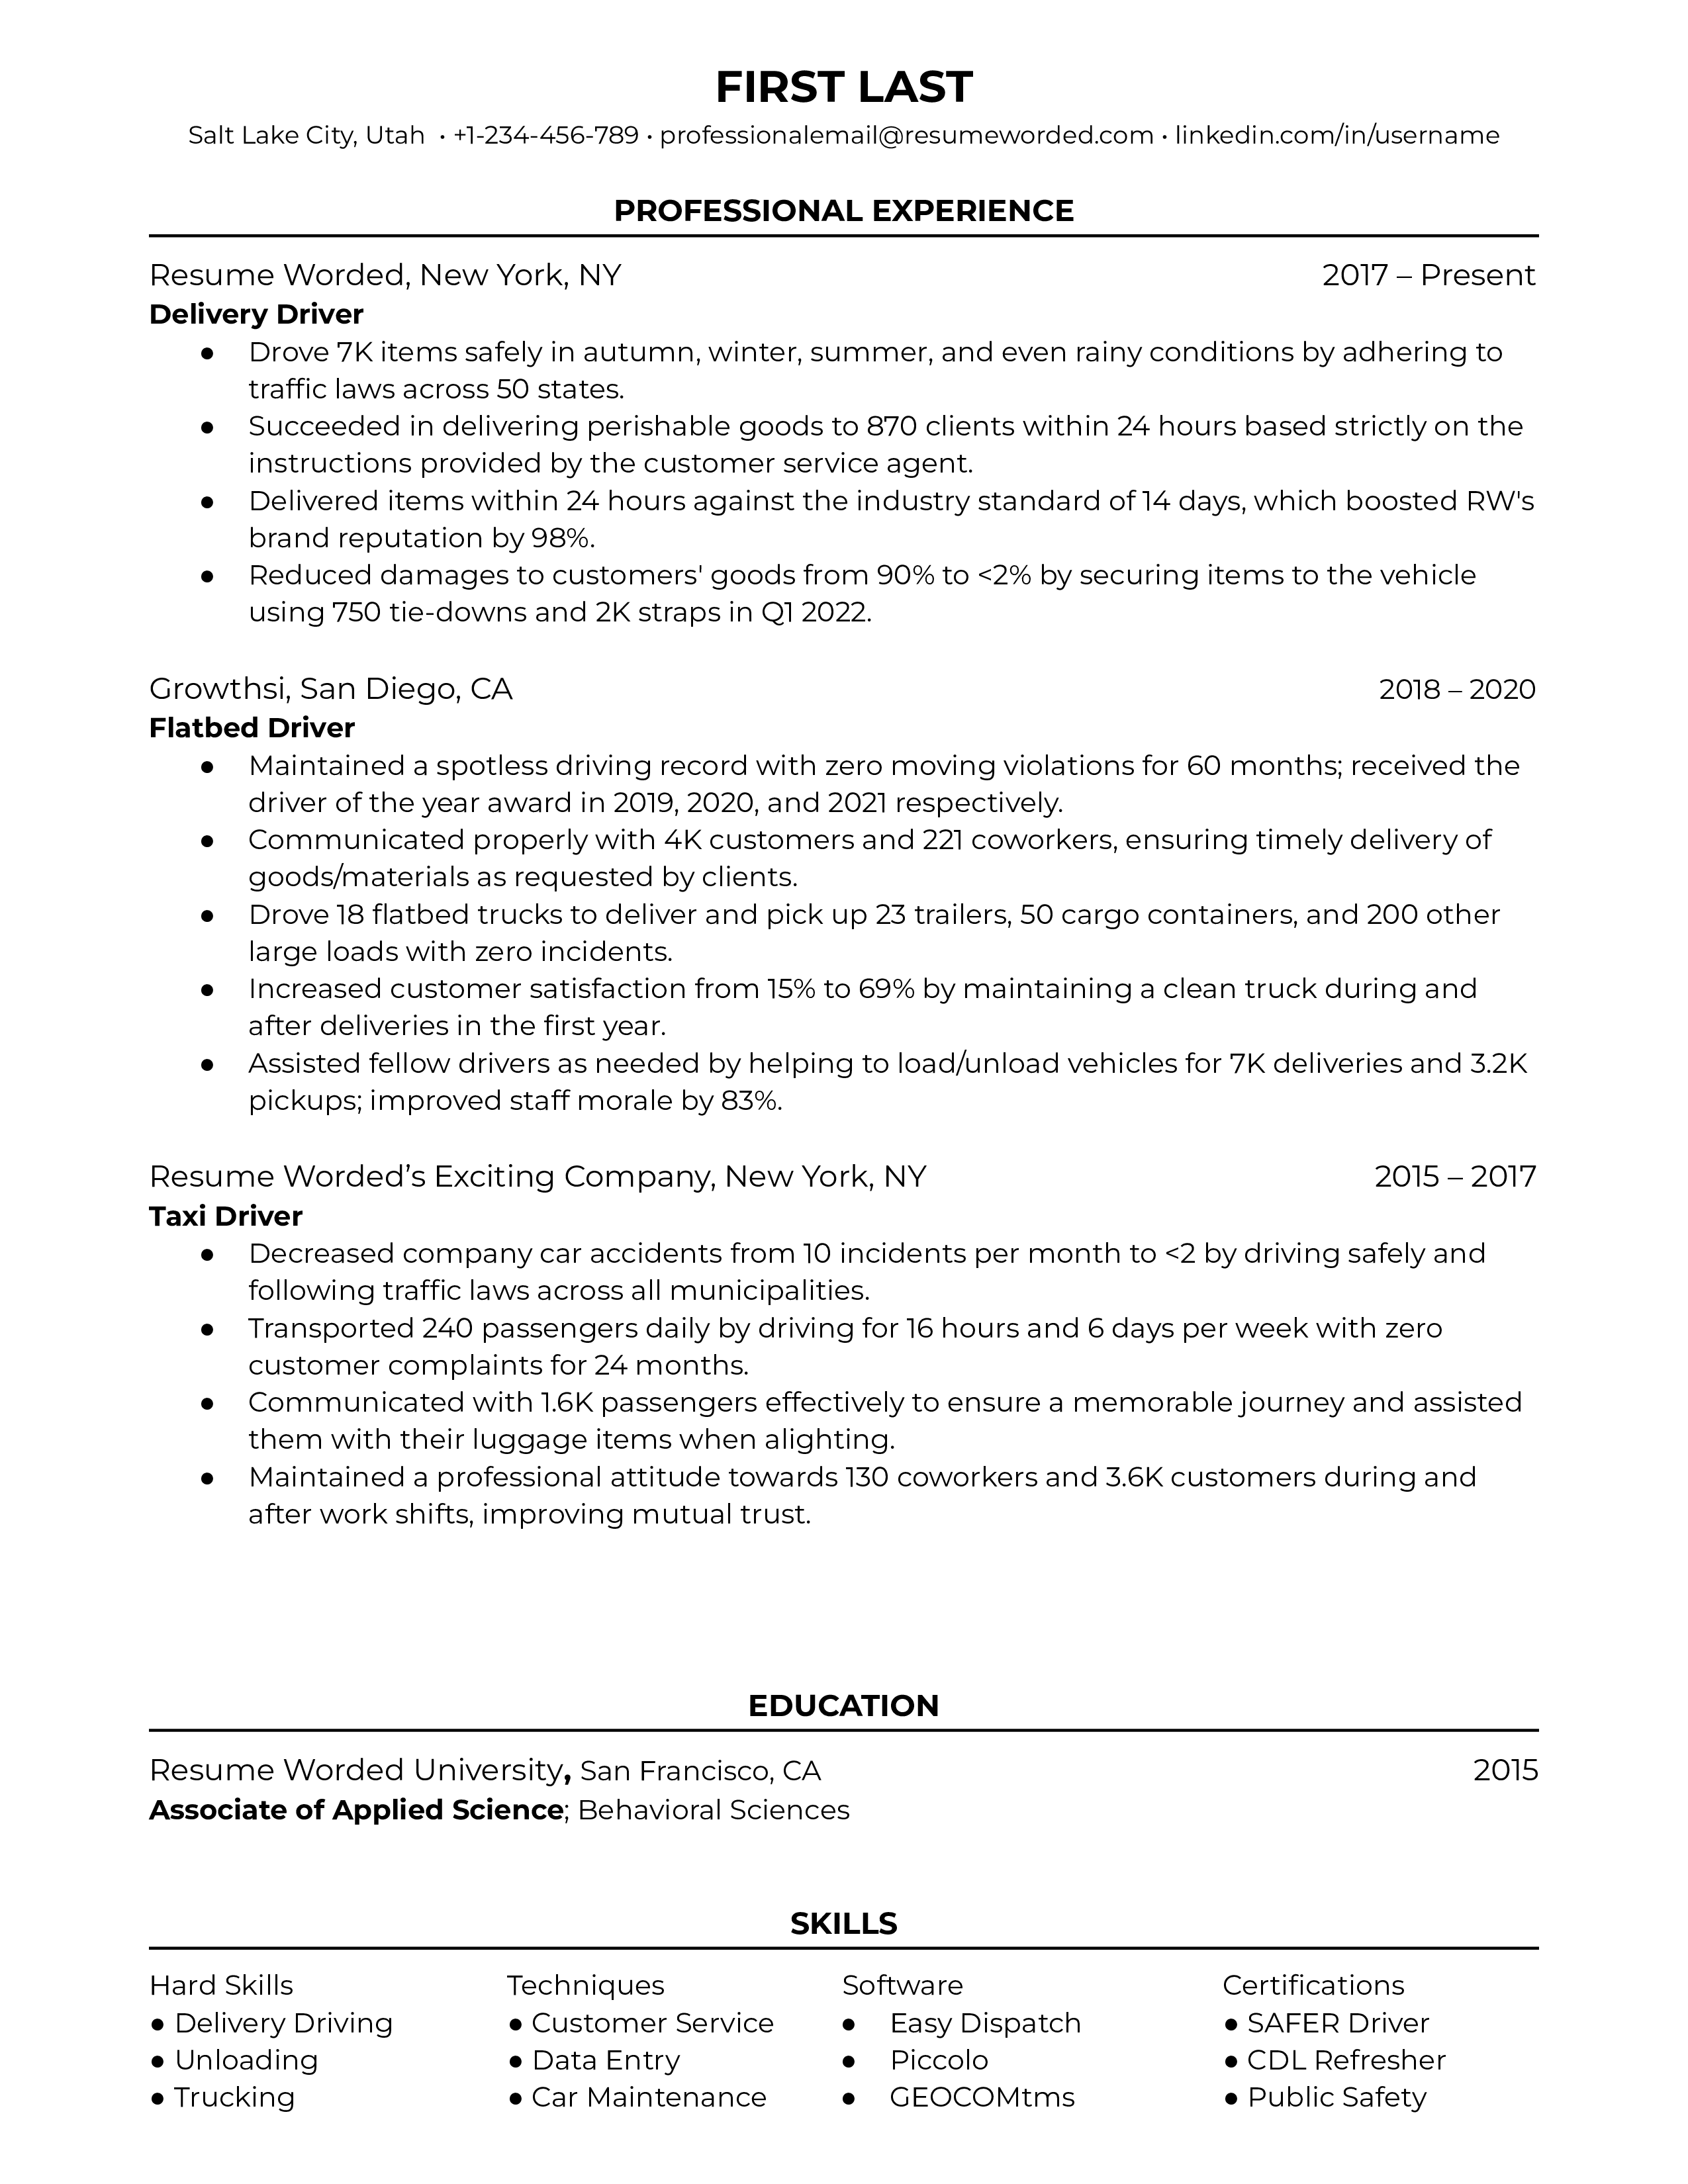 A delivery driver resume sample that highlights the applicant’s specifications and varying experience.